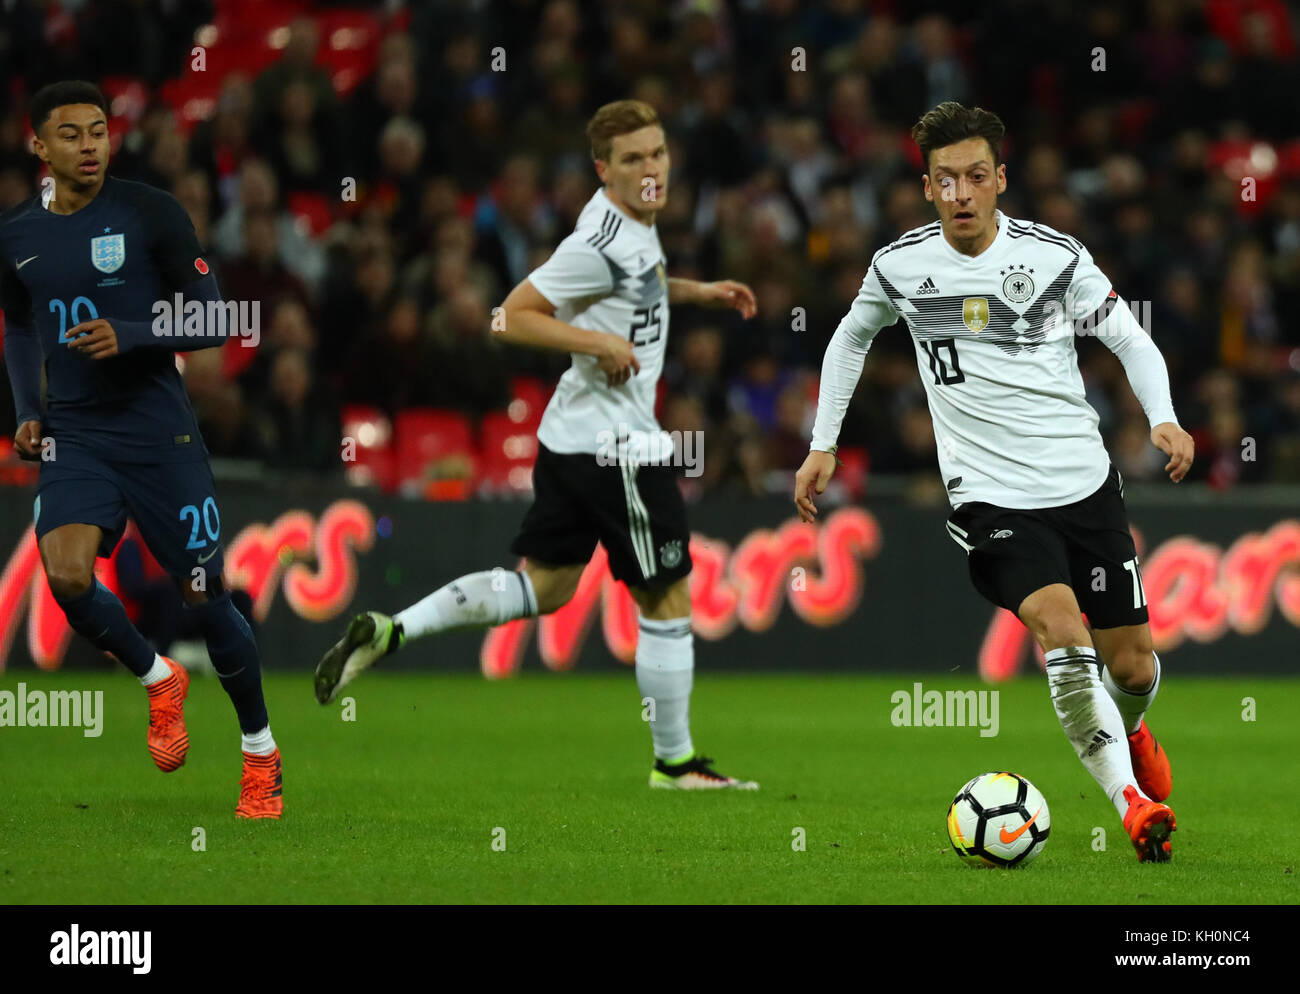 London, Great Britain. 10th Nov, 2017. Germany's Mesut Ozil (R) and Marcel Halstenberg (C) vying for the ball against England's Jesse Lingard during the international soccer match between England and Germany at Wembley stadium in London, Great Britain, 10 November 2017. Credit: Christian Charisius/dpa/Alamy Live News Stock Photo